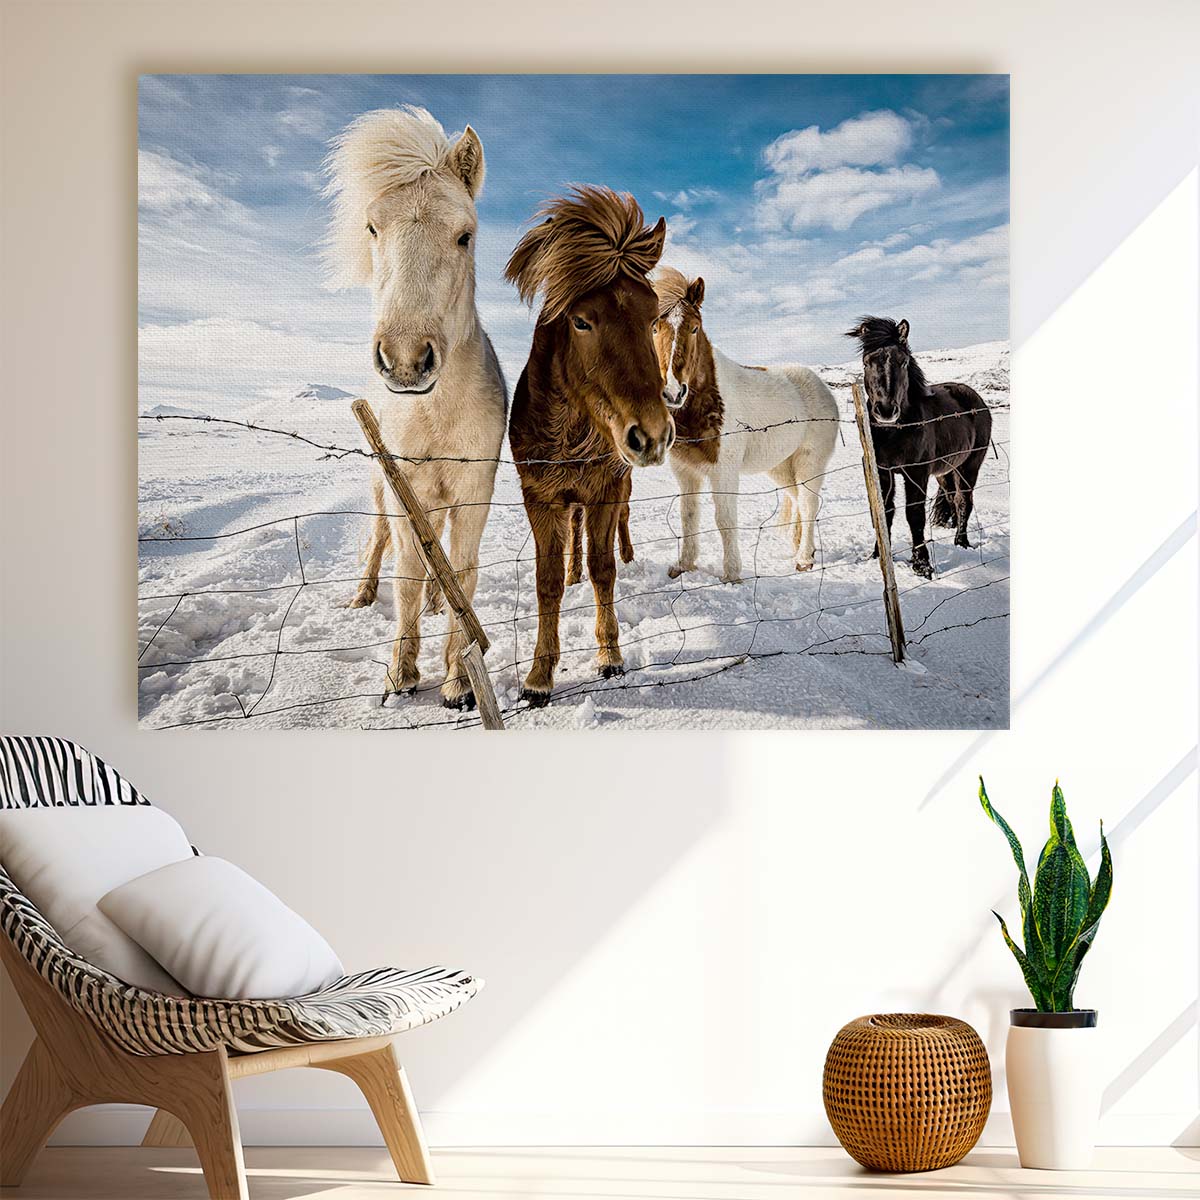 Icelandic Horses in Snowy Landscape Wall Art by Luxuriance Designs. Made in USA.